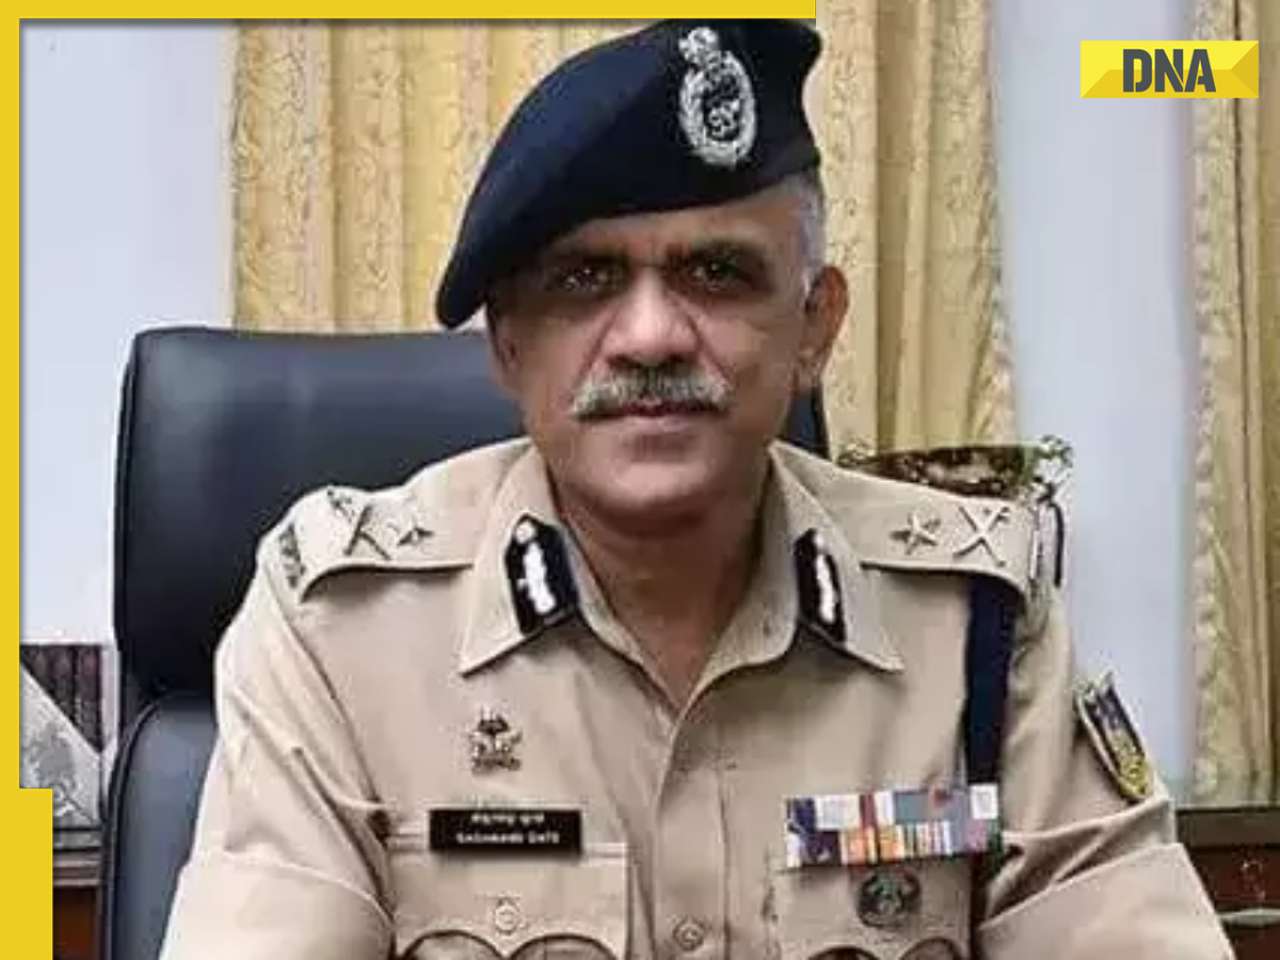 Leadership shakeup in key security agencies: Sadanand Date new NIA DG; BPR&D and NDRF also get new chiefs